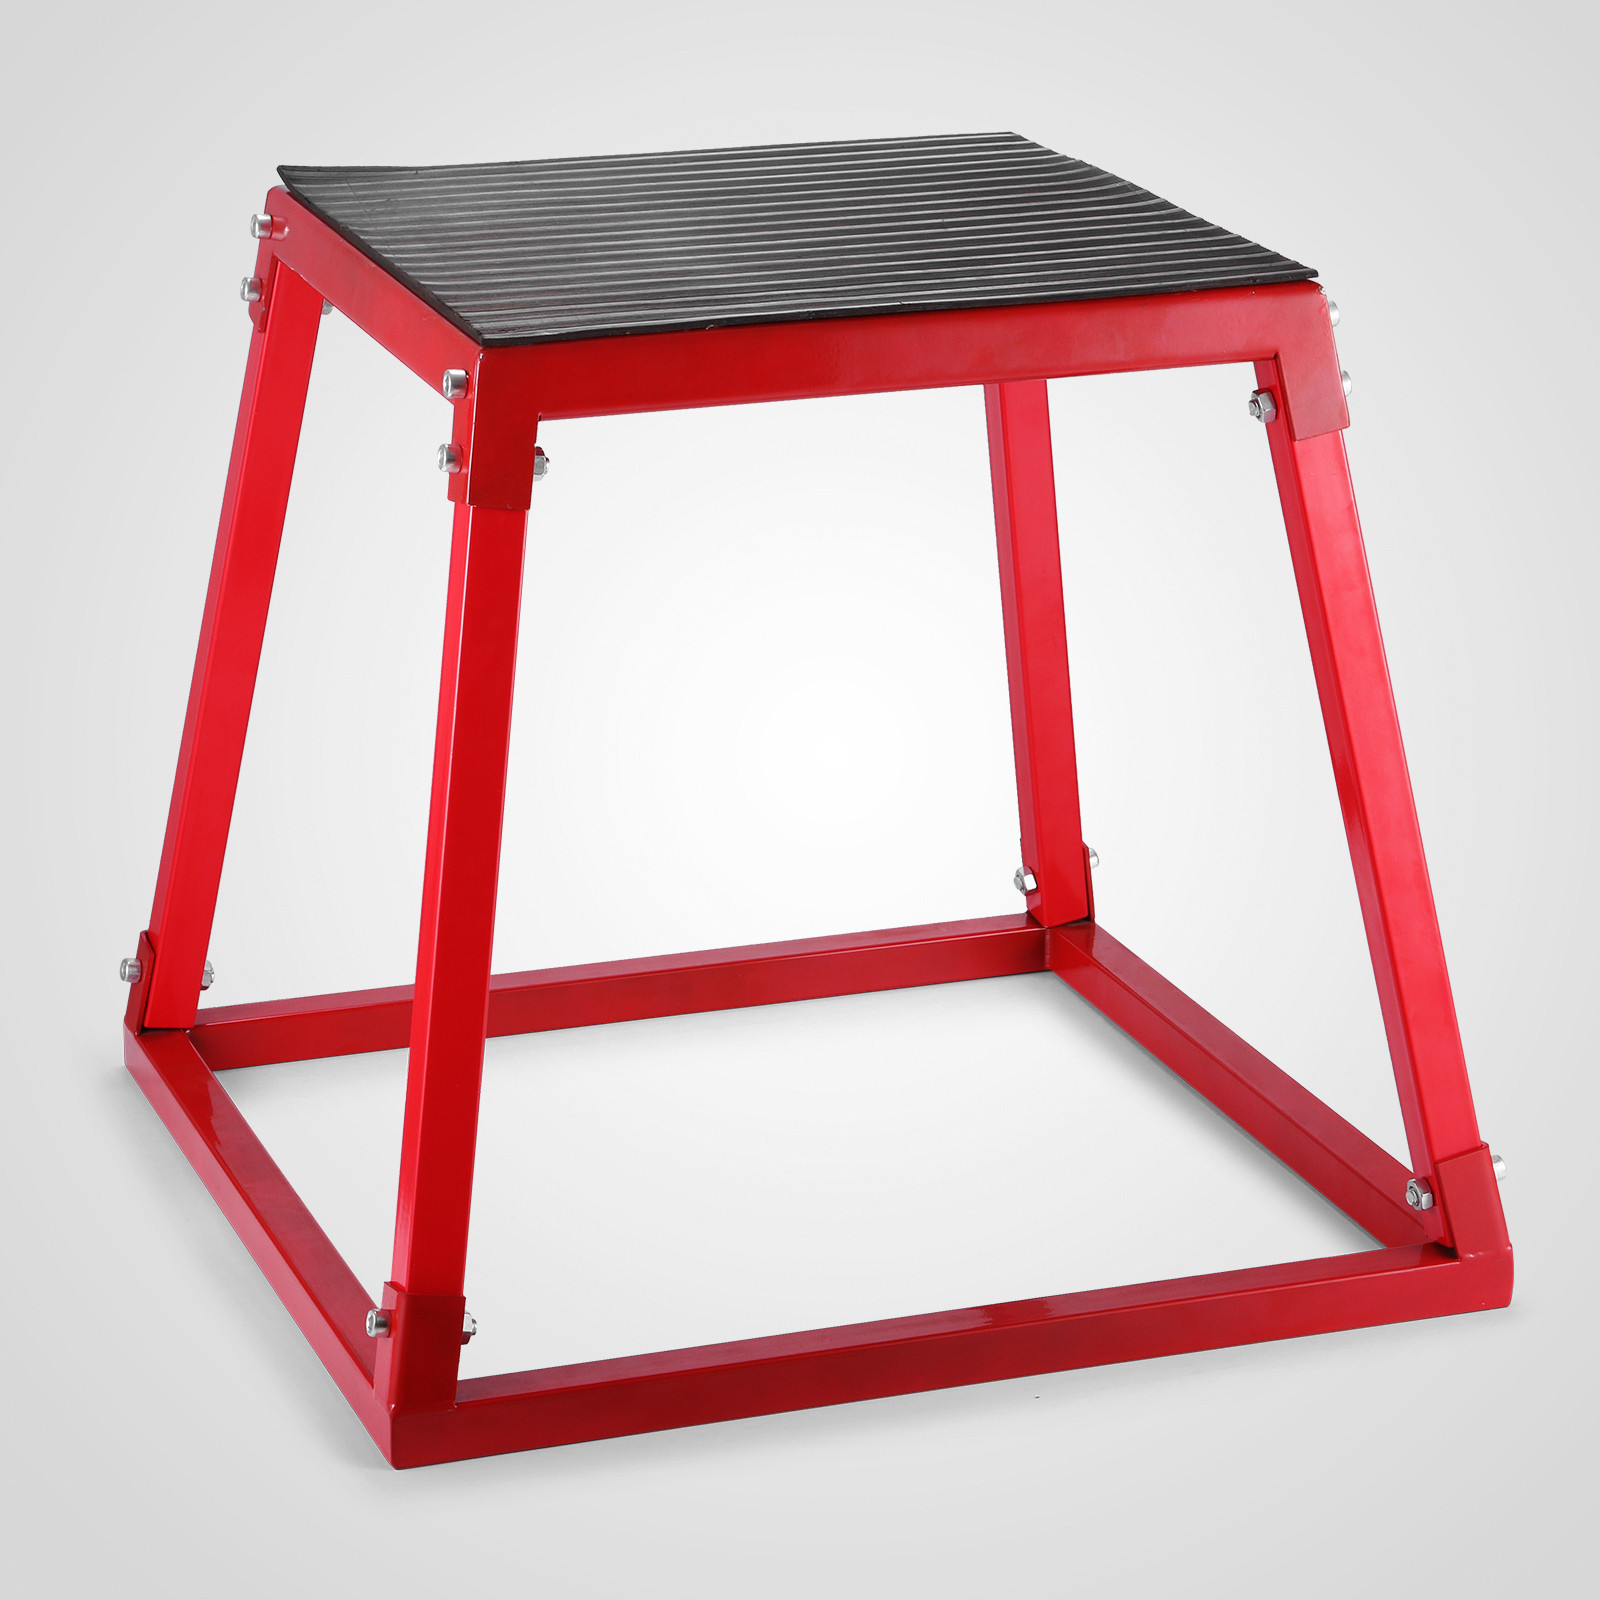 Details about   18" Plyometric Box Plyo Jump Plateform Fitness Exercise Steper Athletes Workout